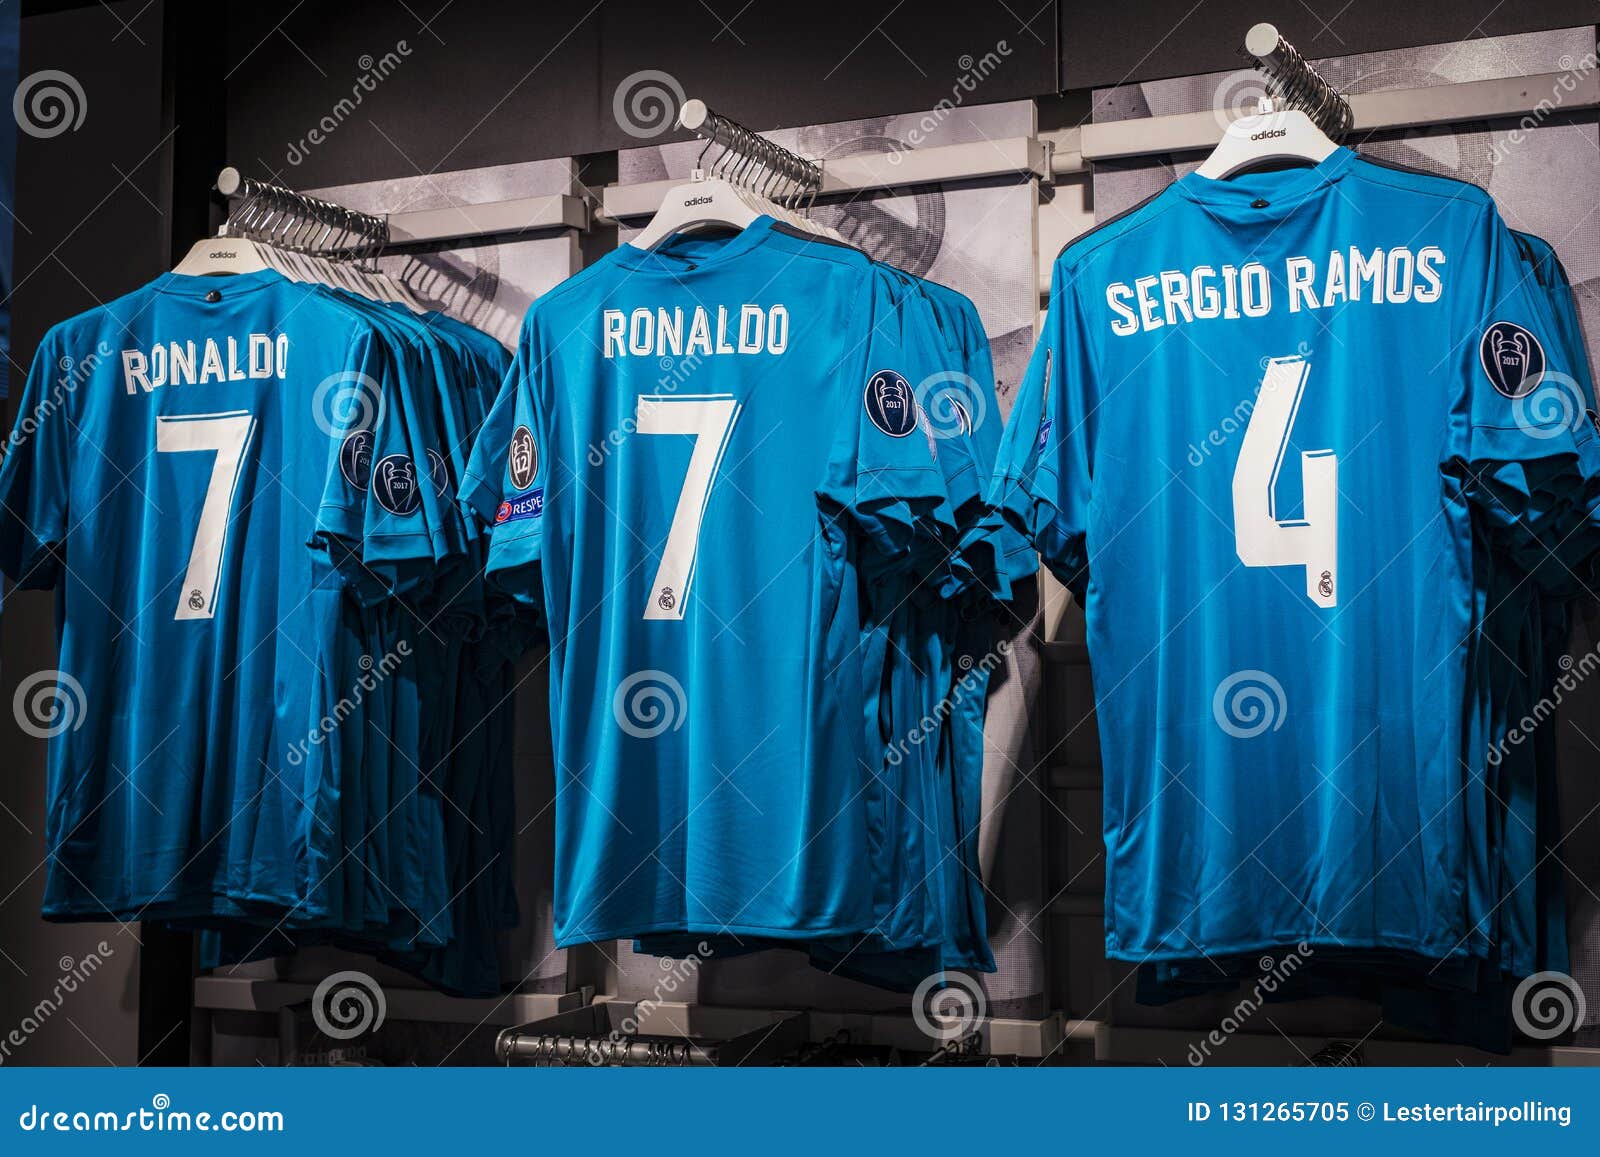 real madrid clothing store